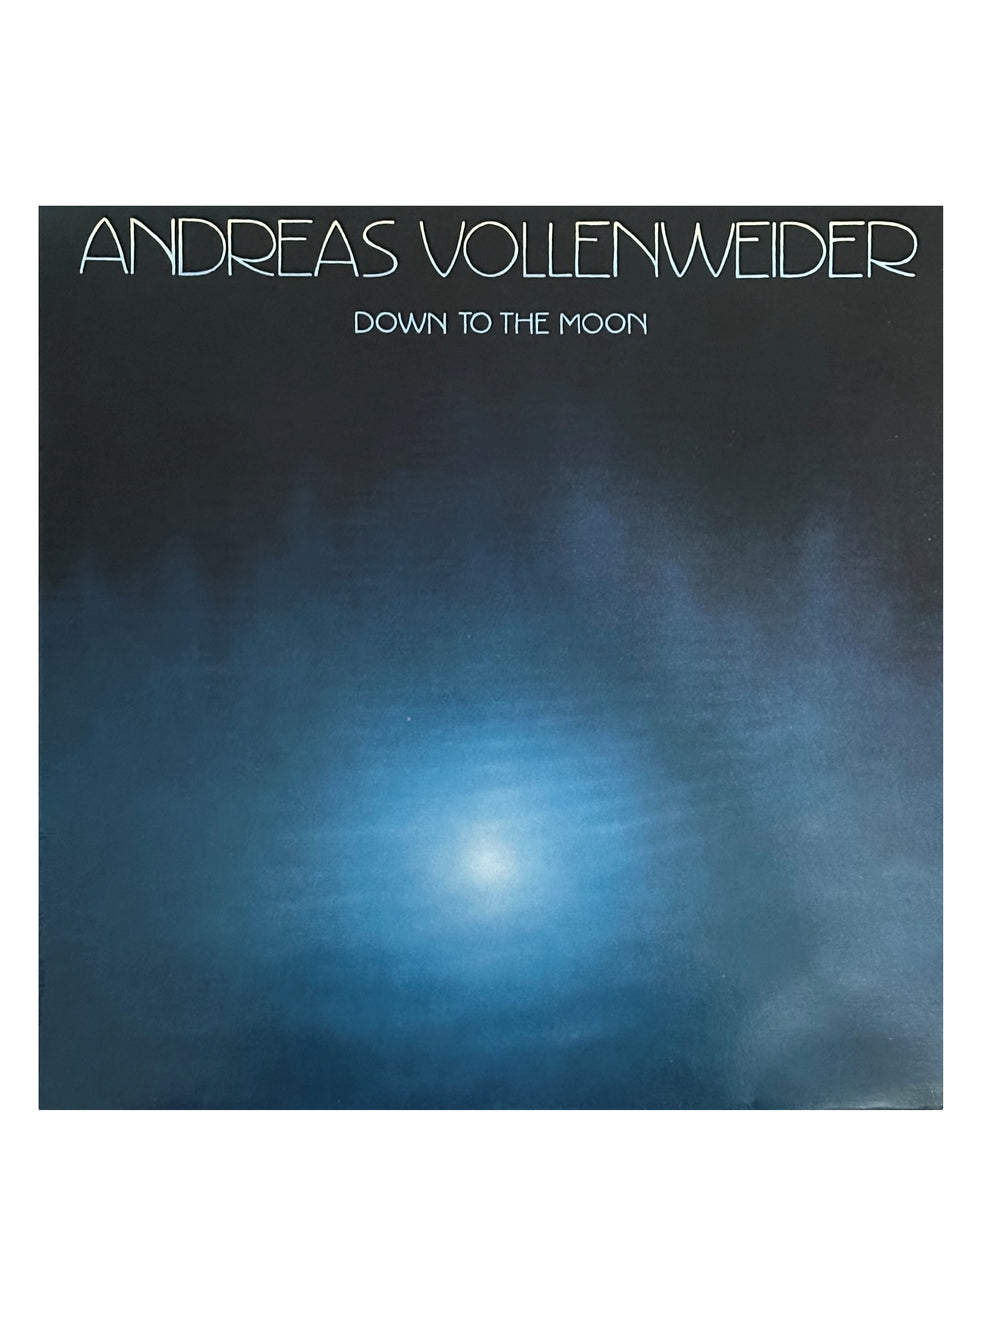 Prince – Andreas Vollenweider – Down To The Moon - Vinyl LP Album EU Play Tested Preloved: